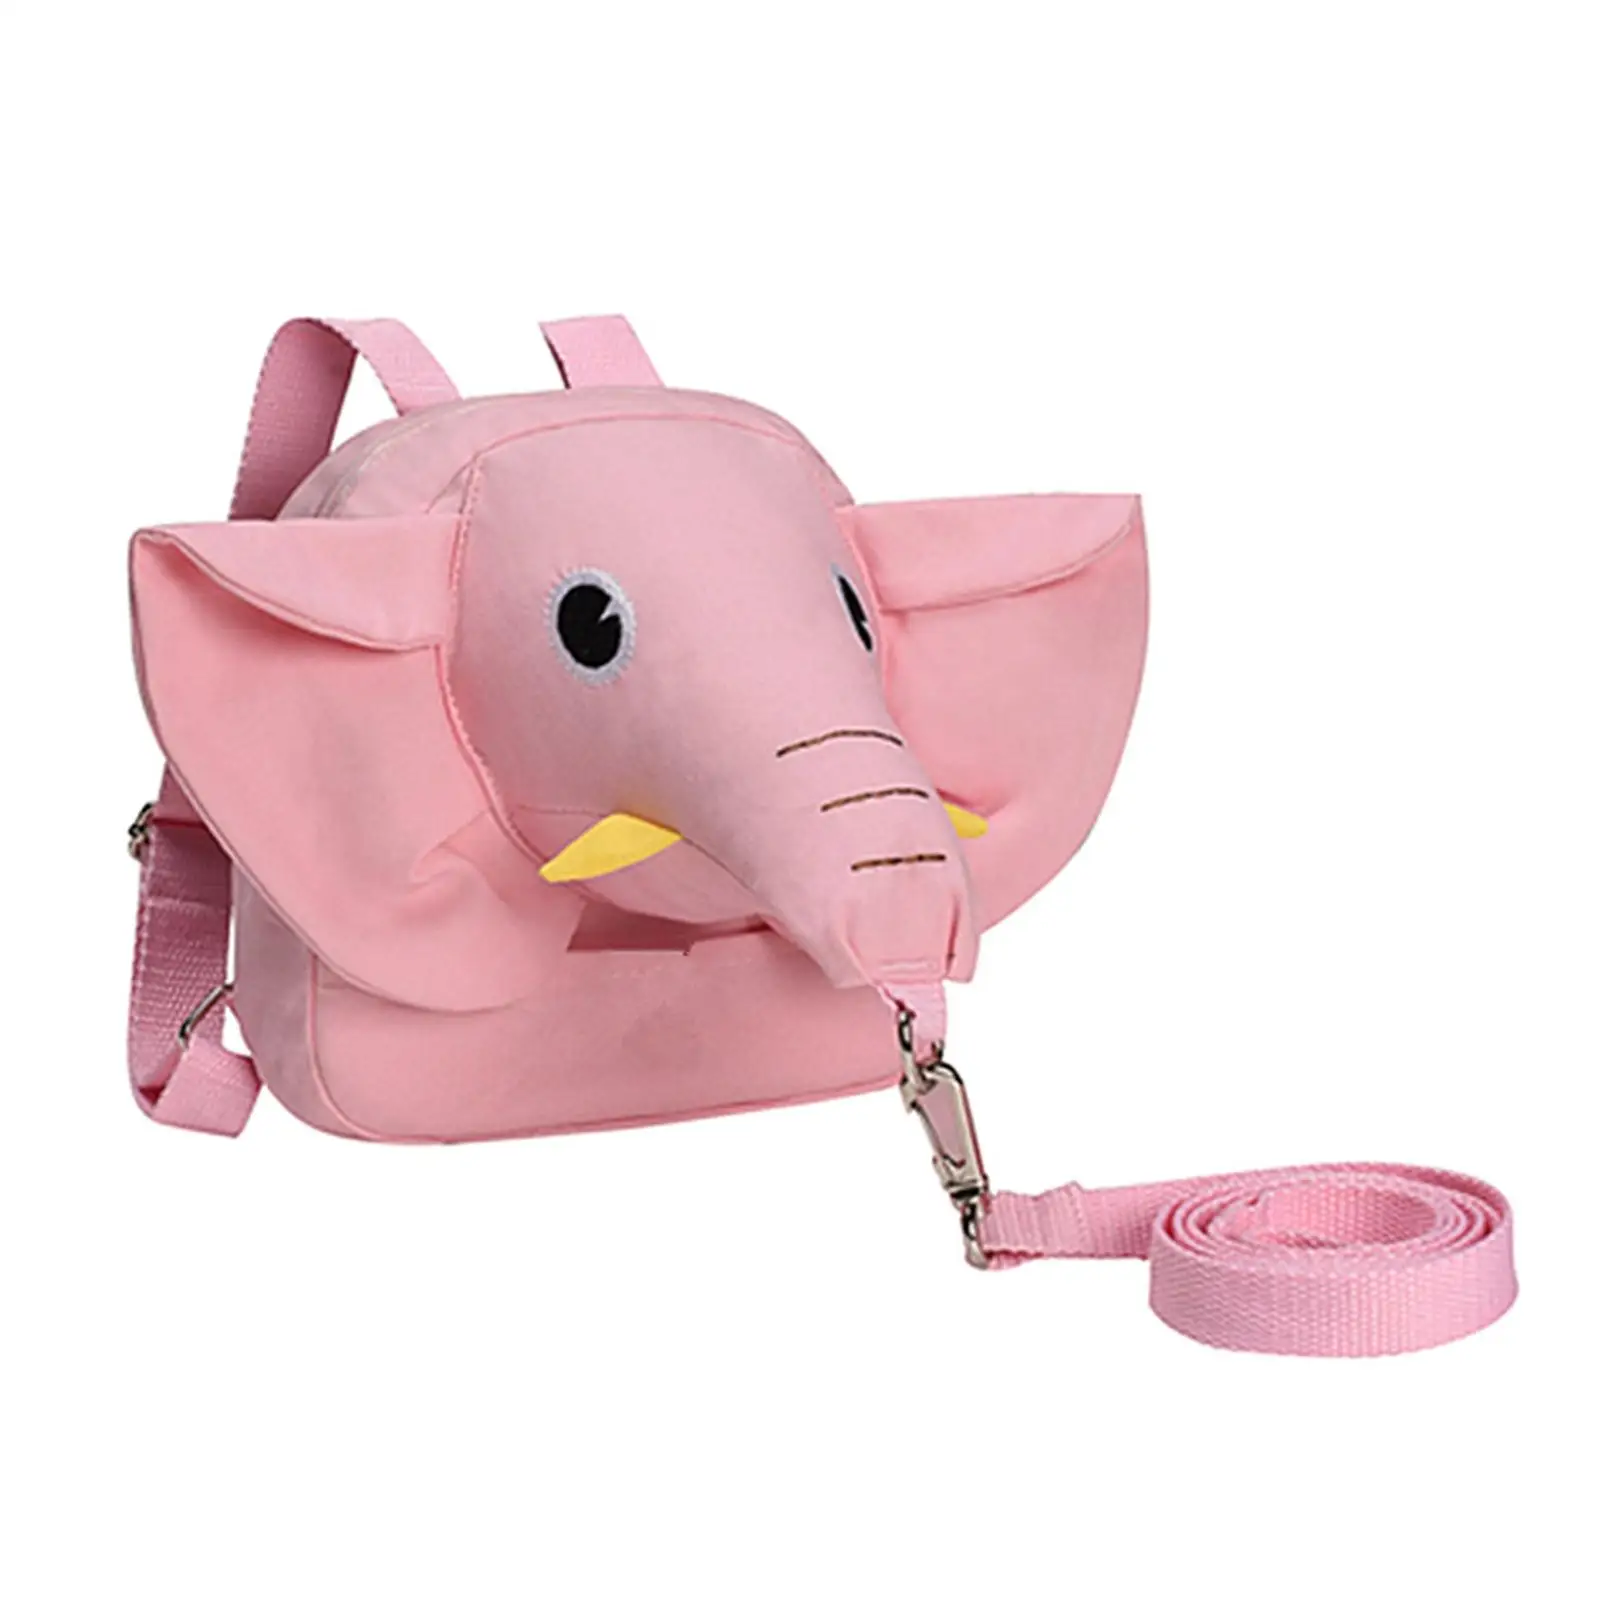 Toddler Backpack with Anti Lost Harness Cute Elephant Wear Resistant Soft Baby Anti Lost Backpack Harness for Kids Children